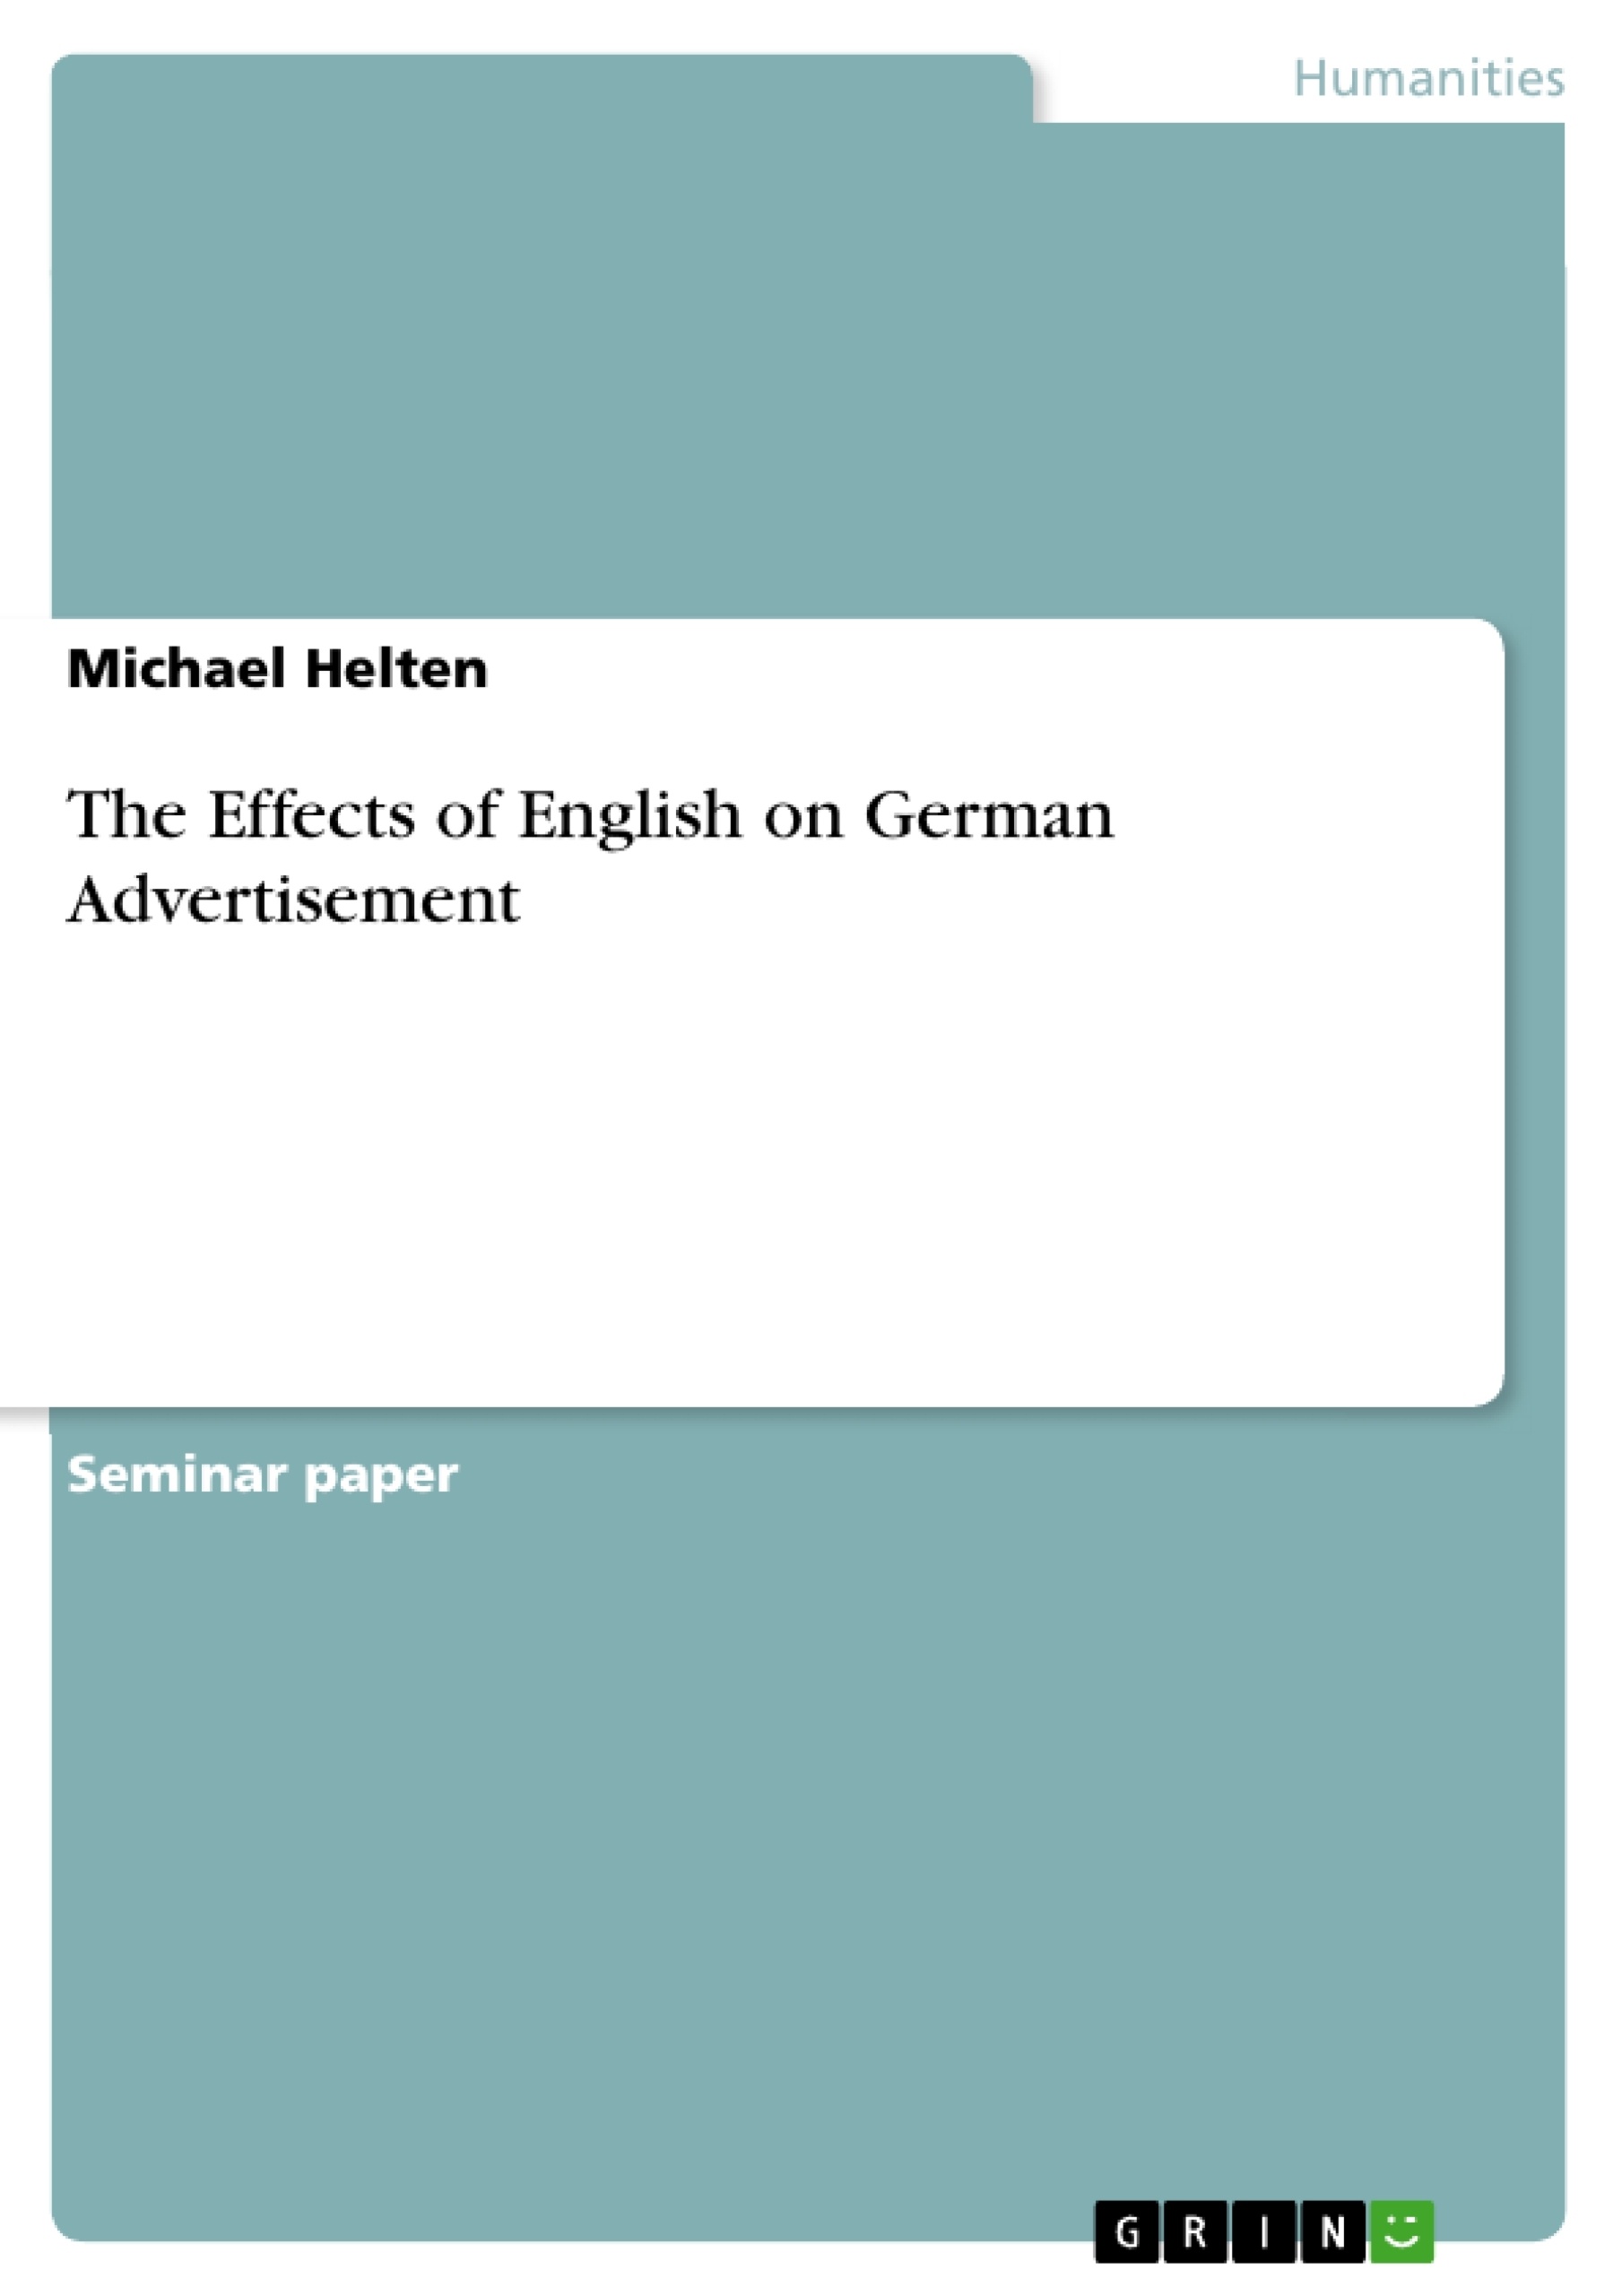 Title: The Effects of English on German Advertisement